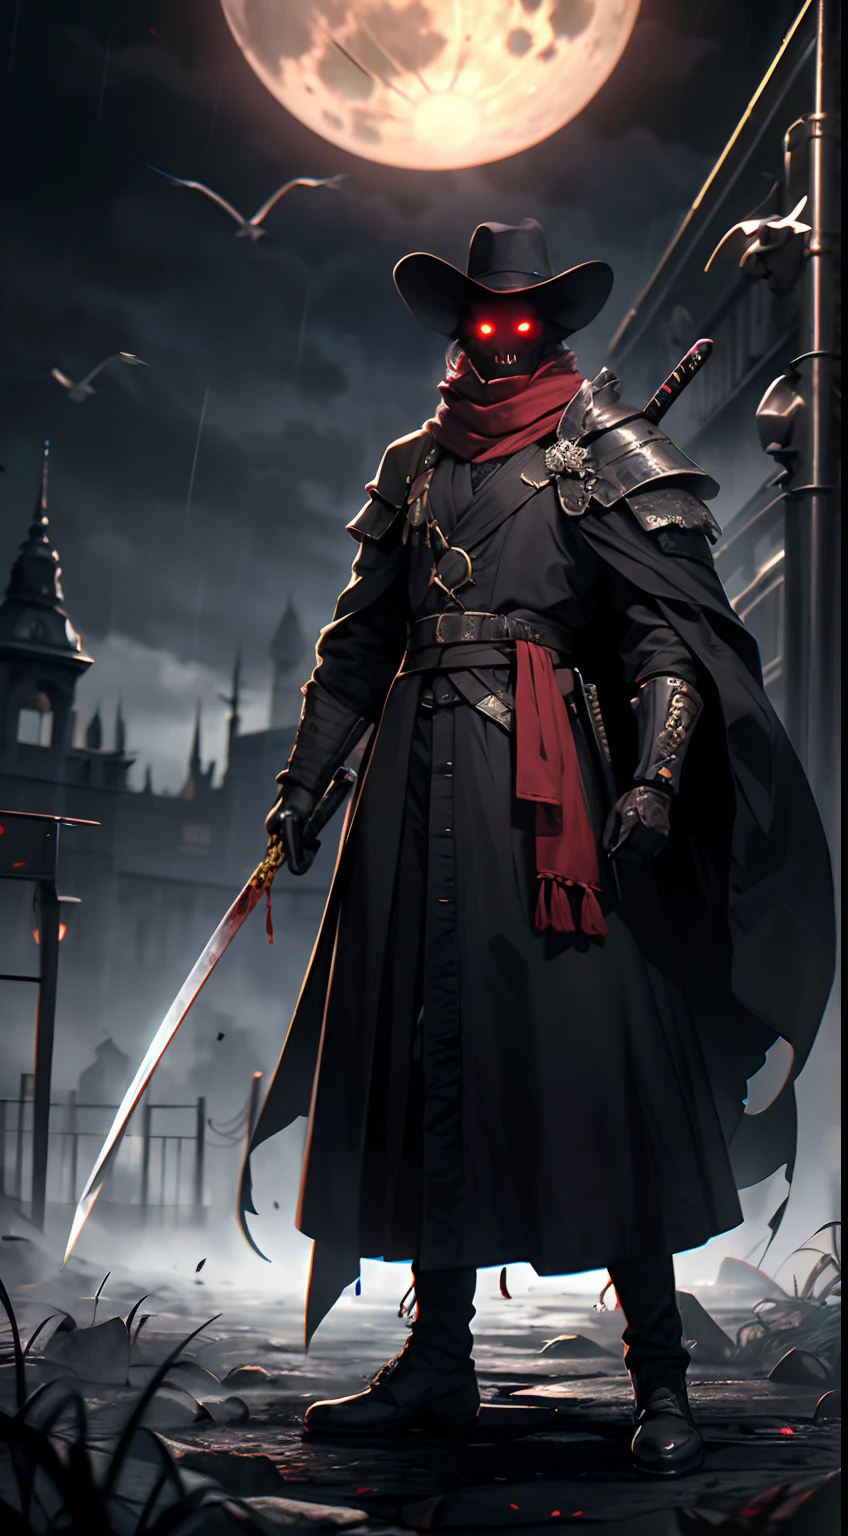 （irascible, irate，A high resolution, super-fine),（((Red glowing eyes))）looks into camera, evil look, Clear facial features, （Golden Hoop Curse）, bloody katana was held in his hand, to grin, human teeth exposed, Dressed in gorgeous armor, The red scarf sways in the wind，scarce face, Shoulder armor youkai skeleton decoration, flame, Kingly temperament, Full body photo, cinematic rim light, The light is delicate, tmasterpiece, ultra - detailed, Epic composition, super HD, high qulity, HighestQuali, 32K, grin, a plague doctor humanoid, holding katana, scary, horor, night, dark, rainy weather, full moon, glowing red eyes, evil, 1600s, graveyard background, gloomy background, black clouds, a lot zombies red eyes looking at the view, black red details robe, wallpaper